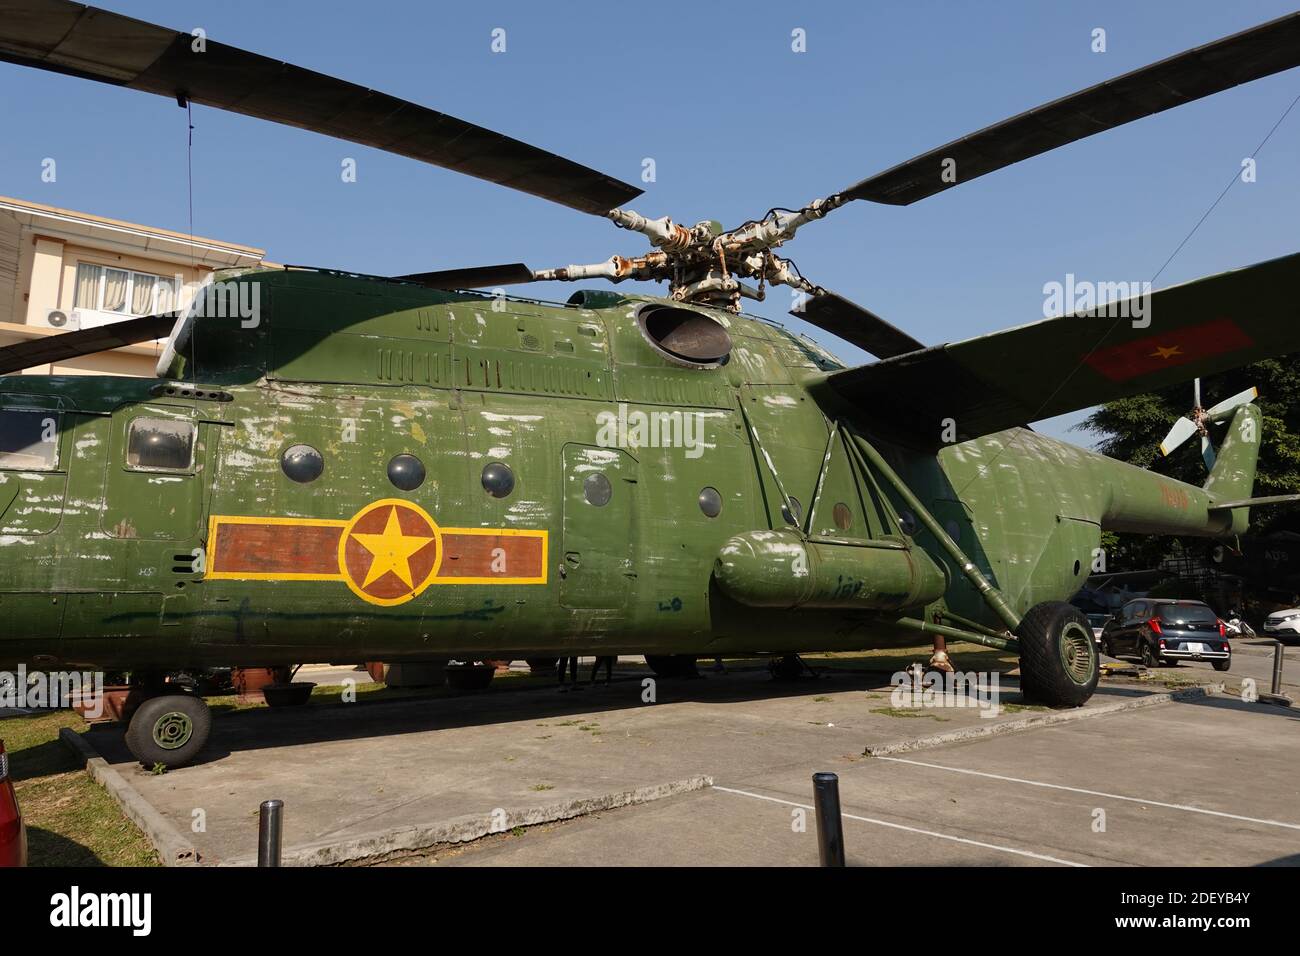 Russian military attack helicopter Mil Mi-26 in Vietnam People's Air Force Museum, Hanoi Stock Photo